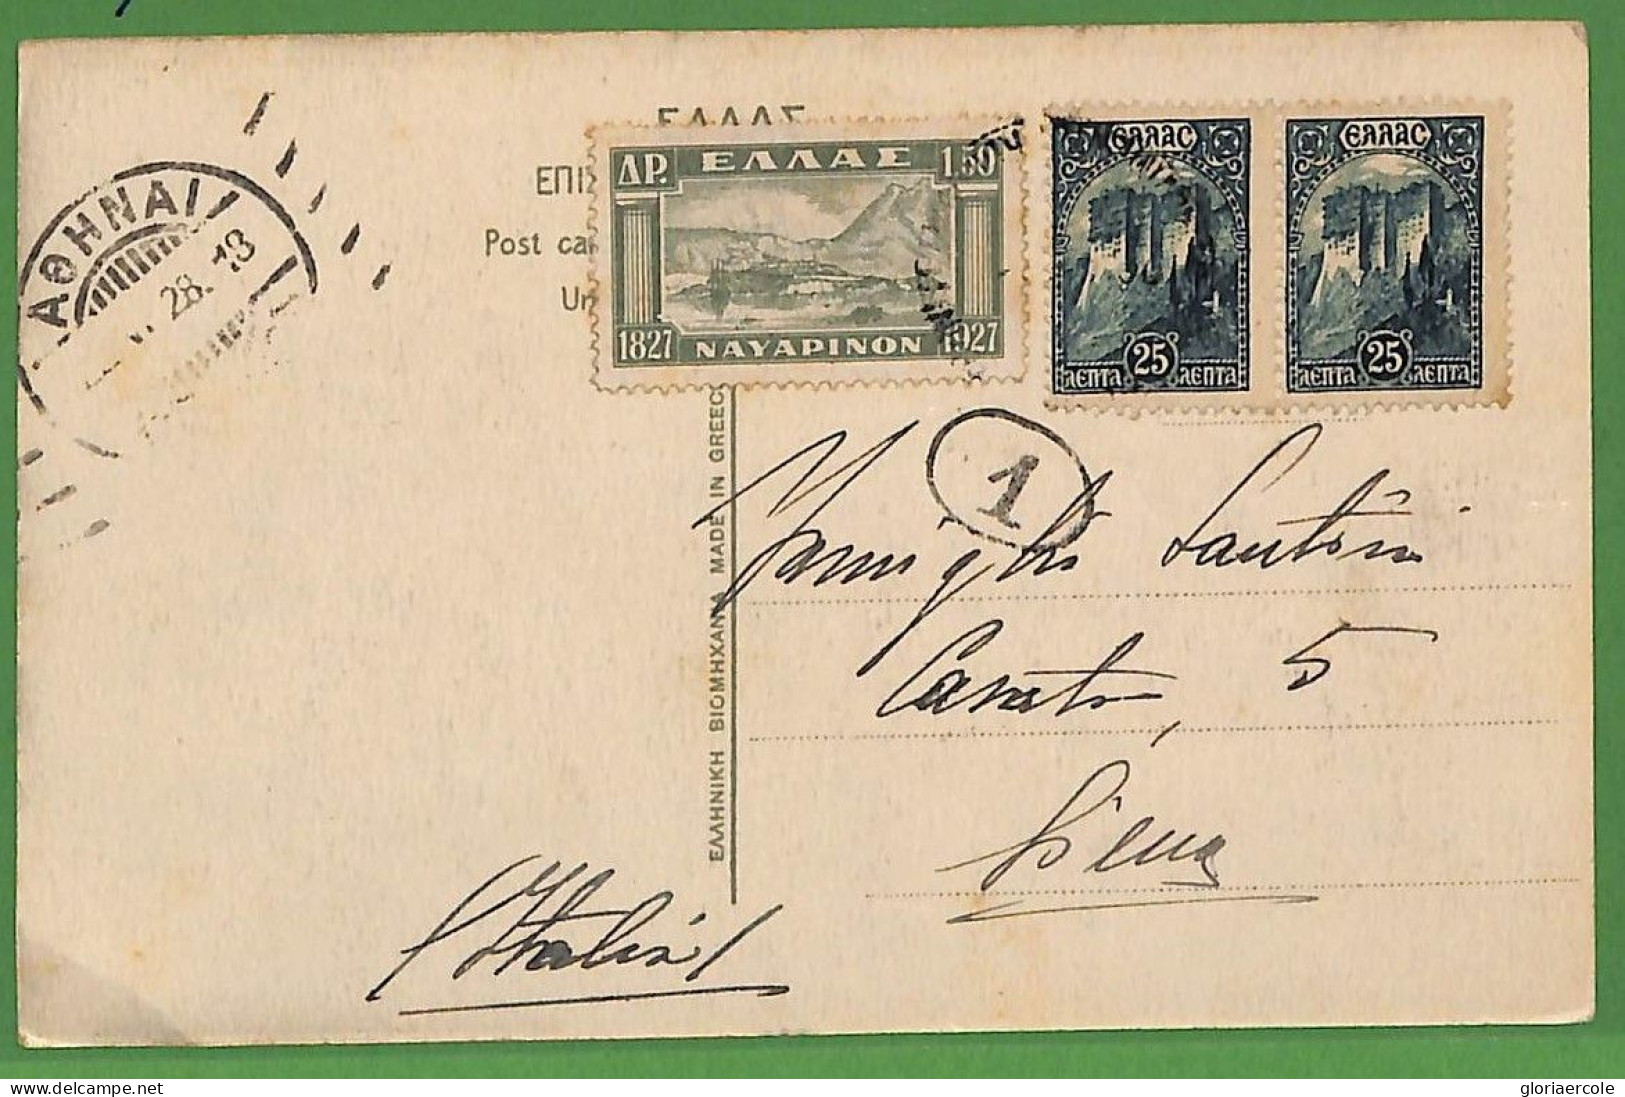 Ad0889 - GREECE - Postal History -  POSTCARD To ITALY 1928 - Covers & Documents